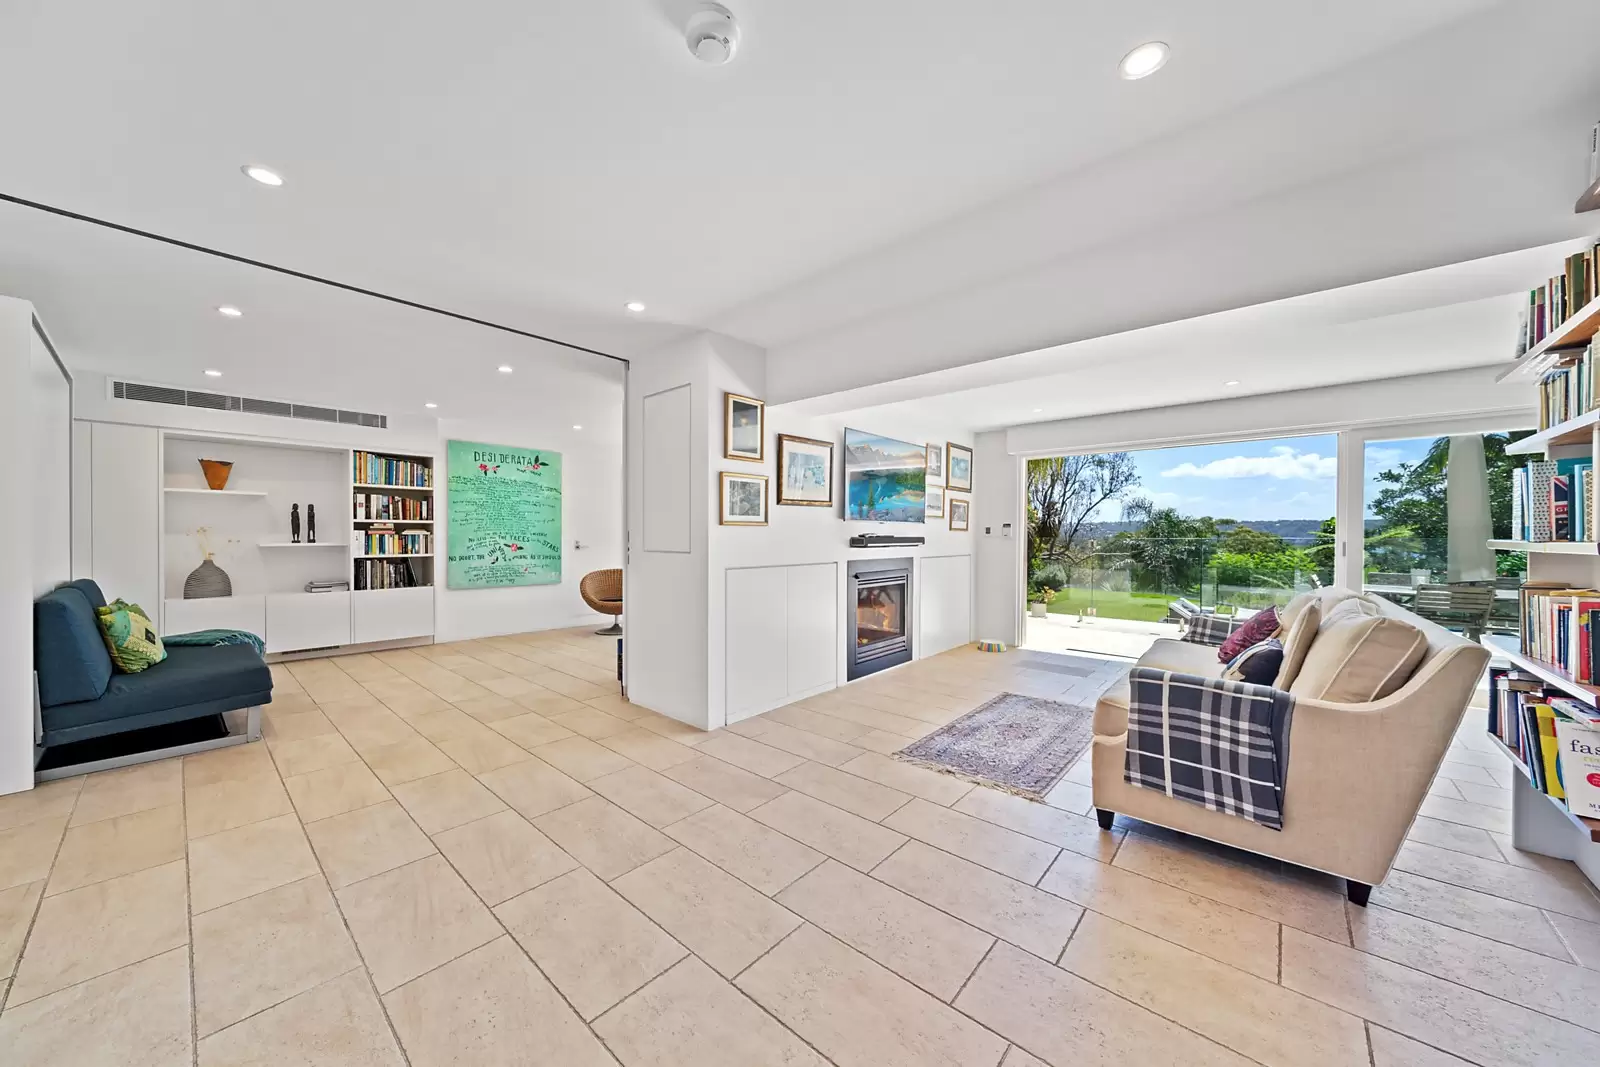 Photo #6: 18 Burrabirra Avenue, Vaucluse - Sold by Sydney Sotheby's International Realty